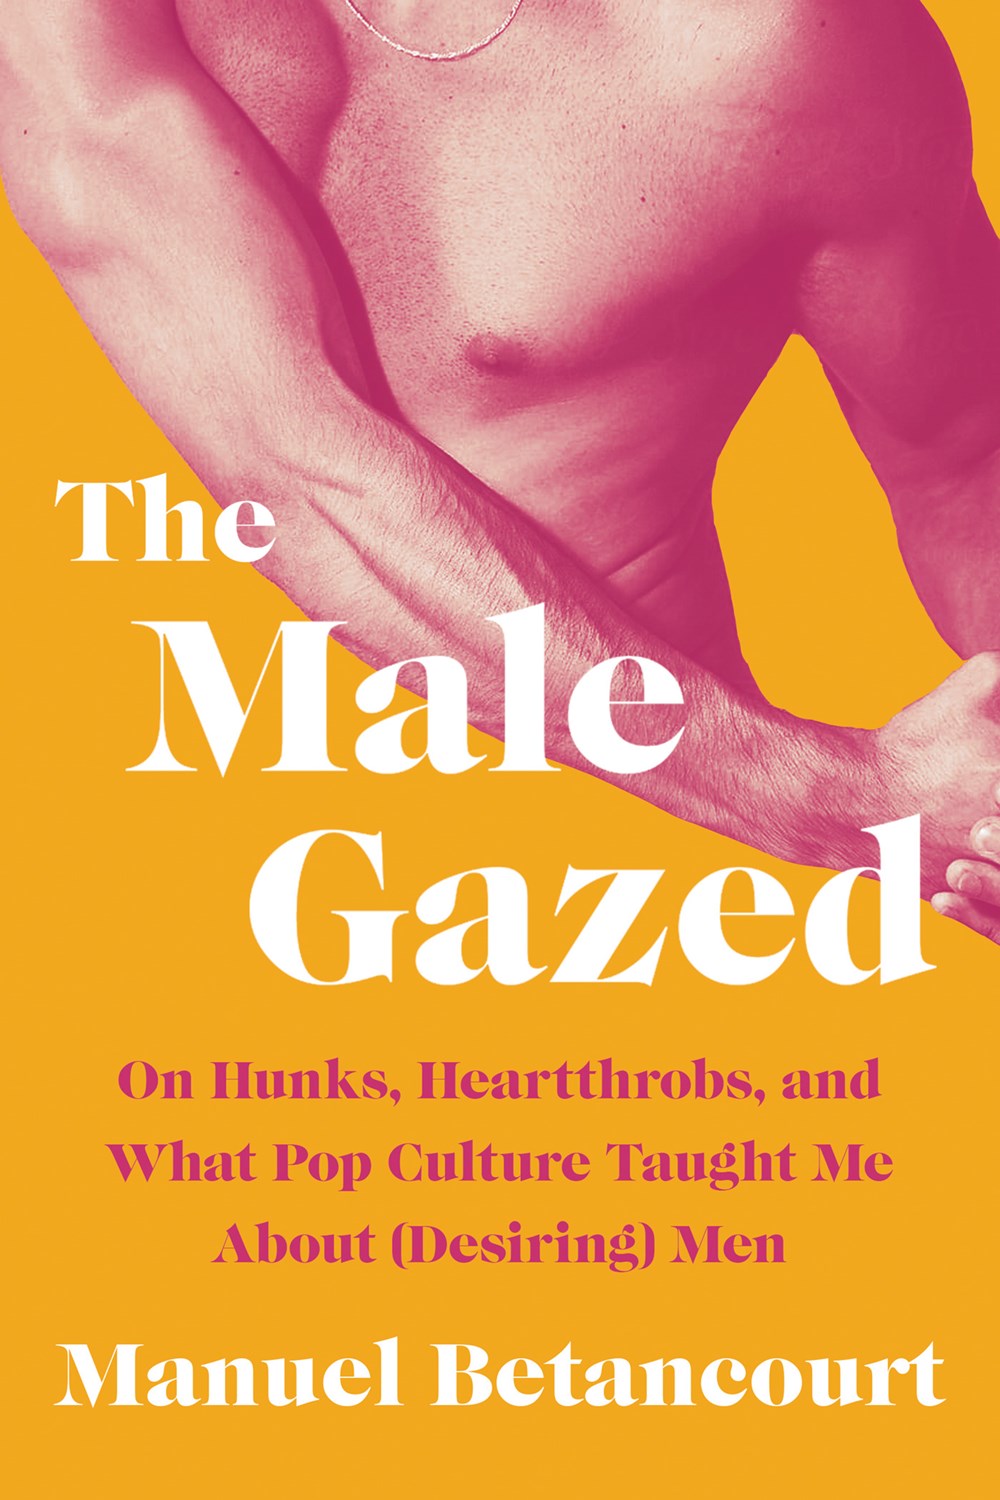 The Male Gazed: On Hunks, Heartthrobs, and What Pop Culture Taught Me About (Desiring) Men